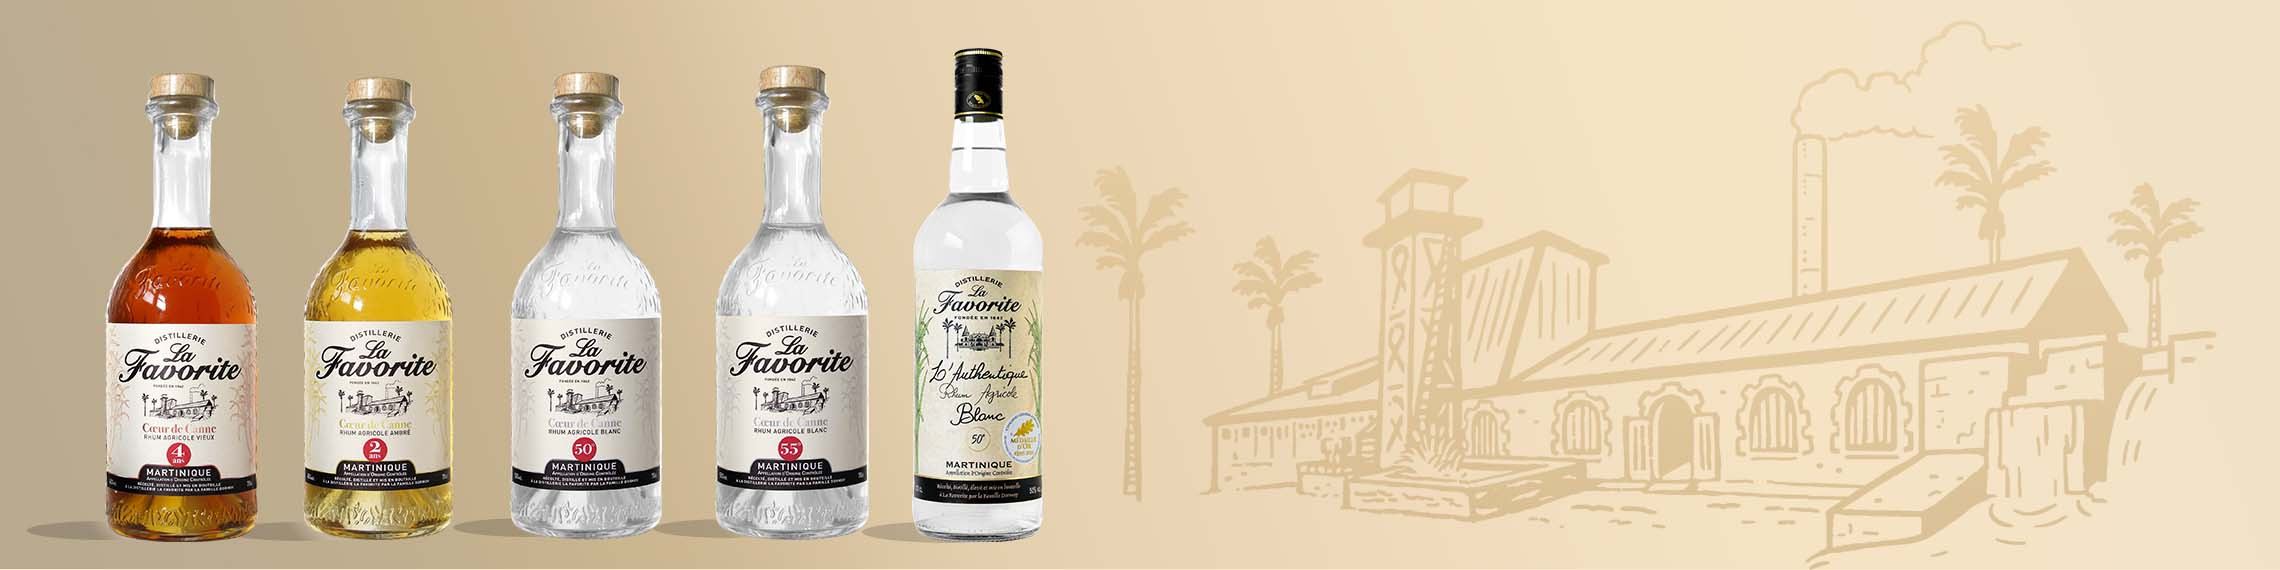 Rums from La Favorite, a distillery founded in 1842 in Martinique.